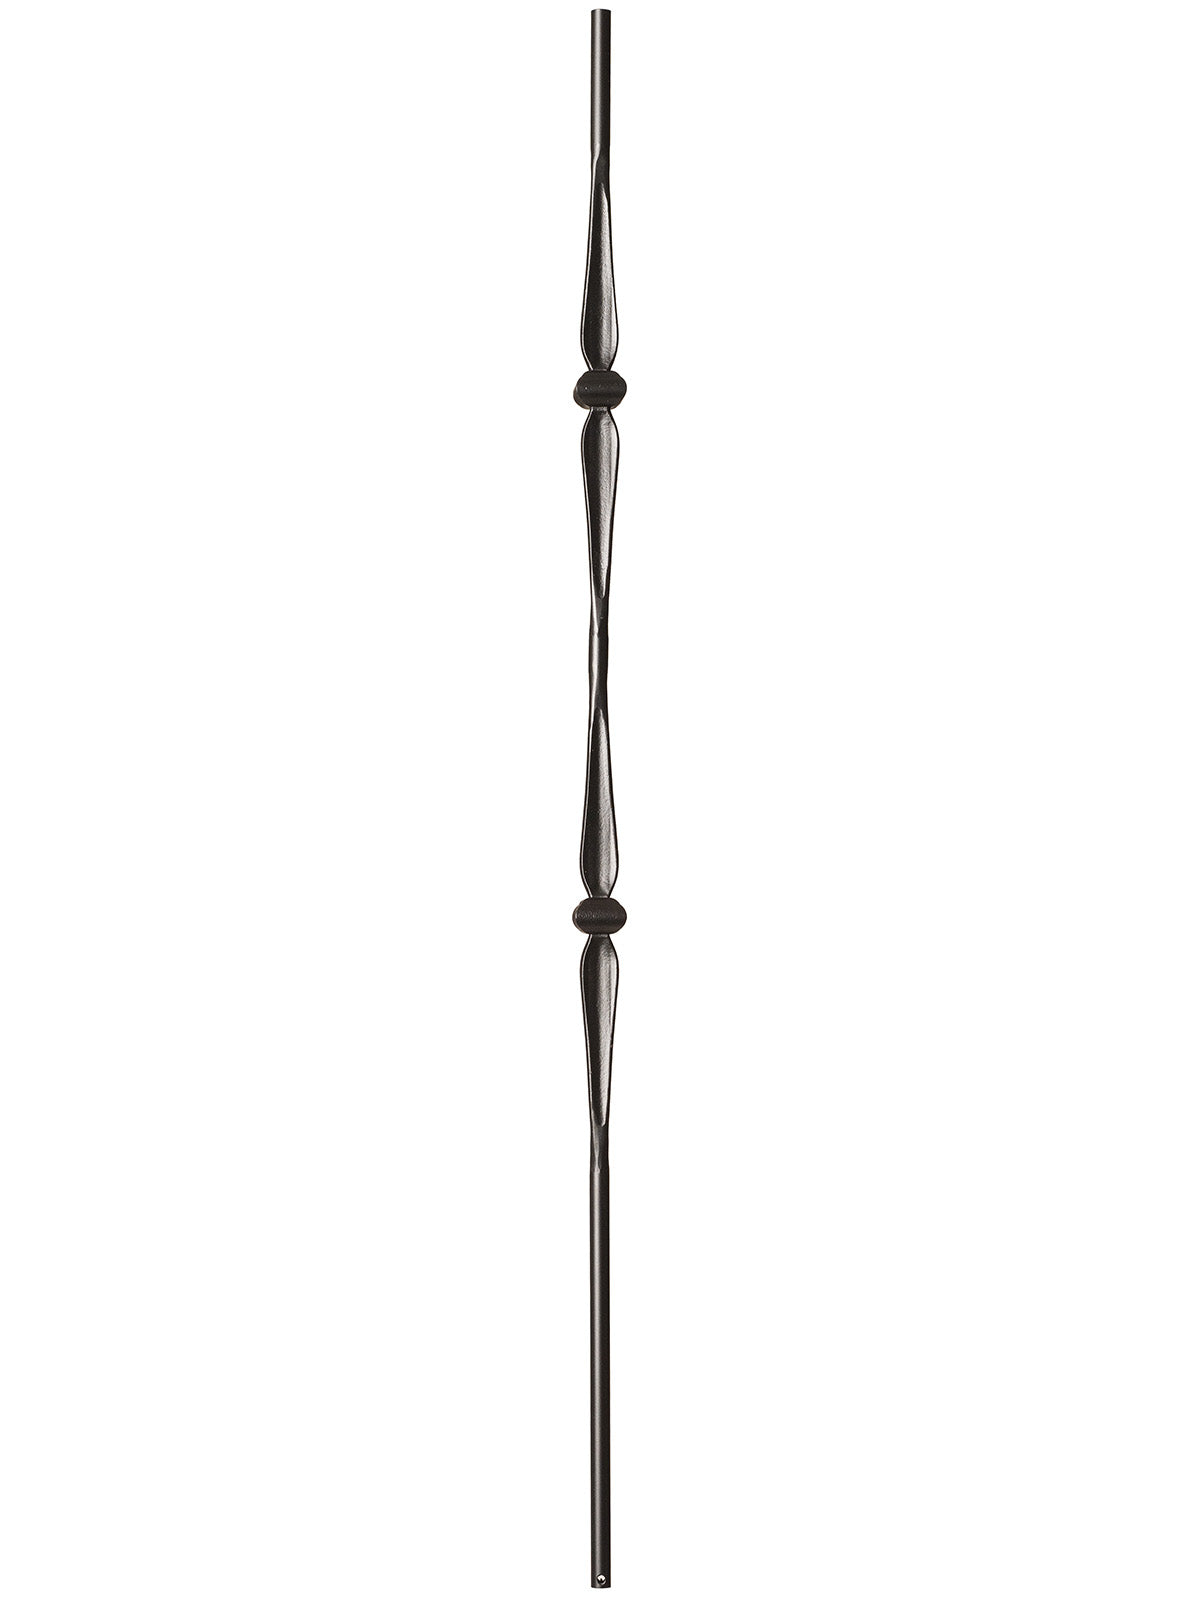 Iron Baluster 9070 - 9/16" Round - Double Knuckle Spoon